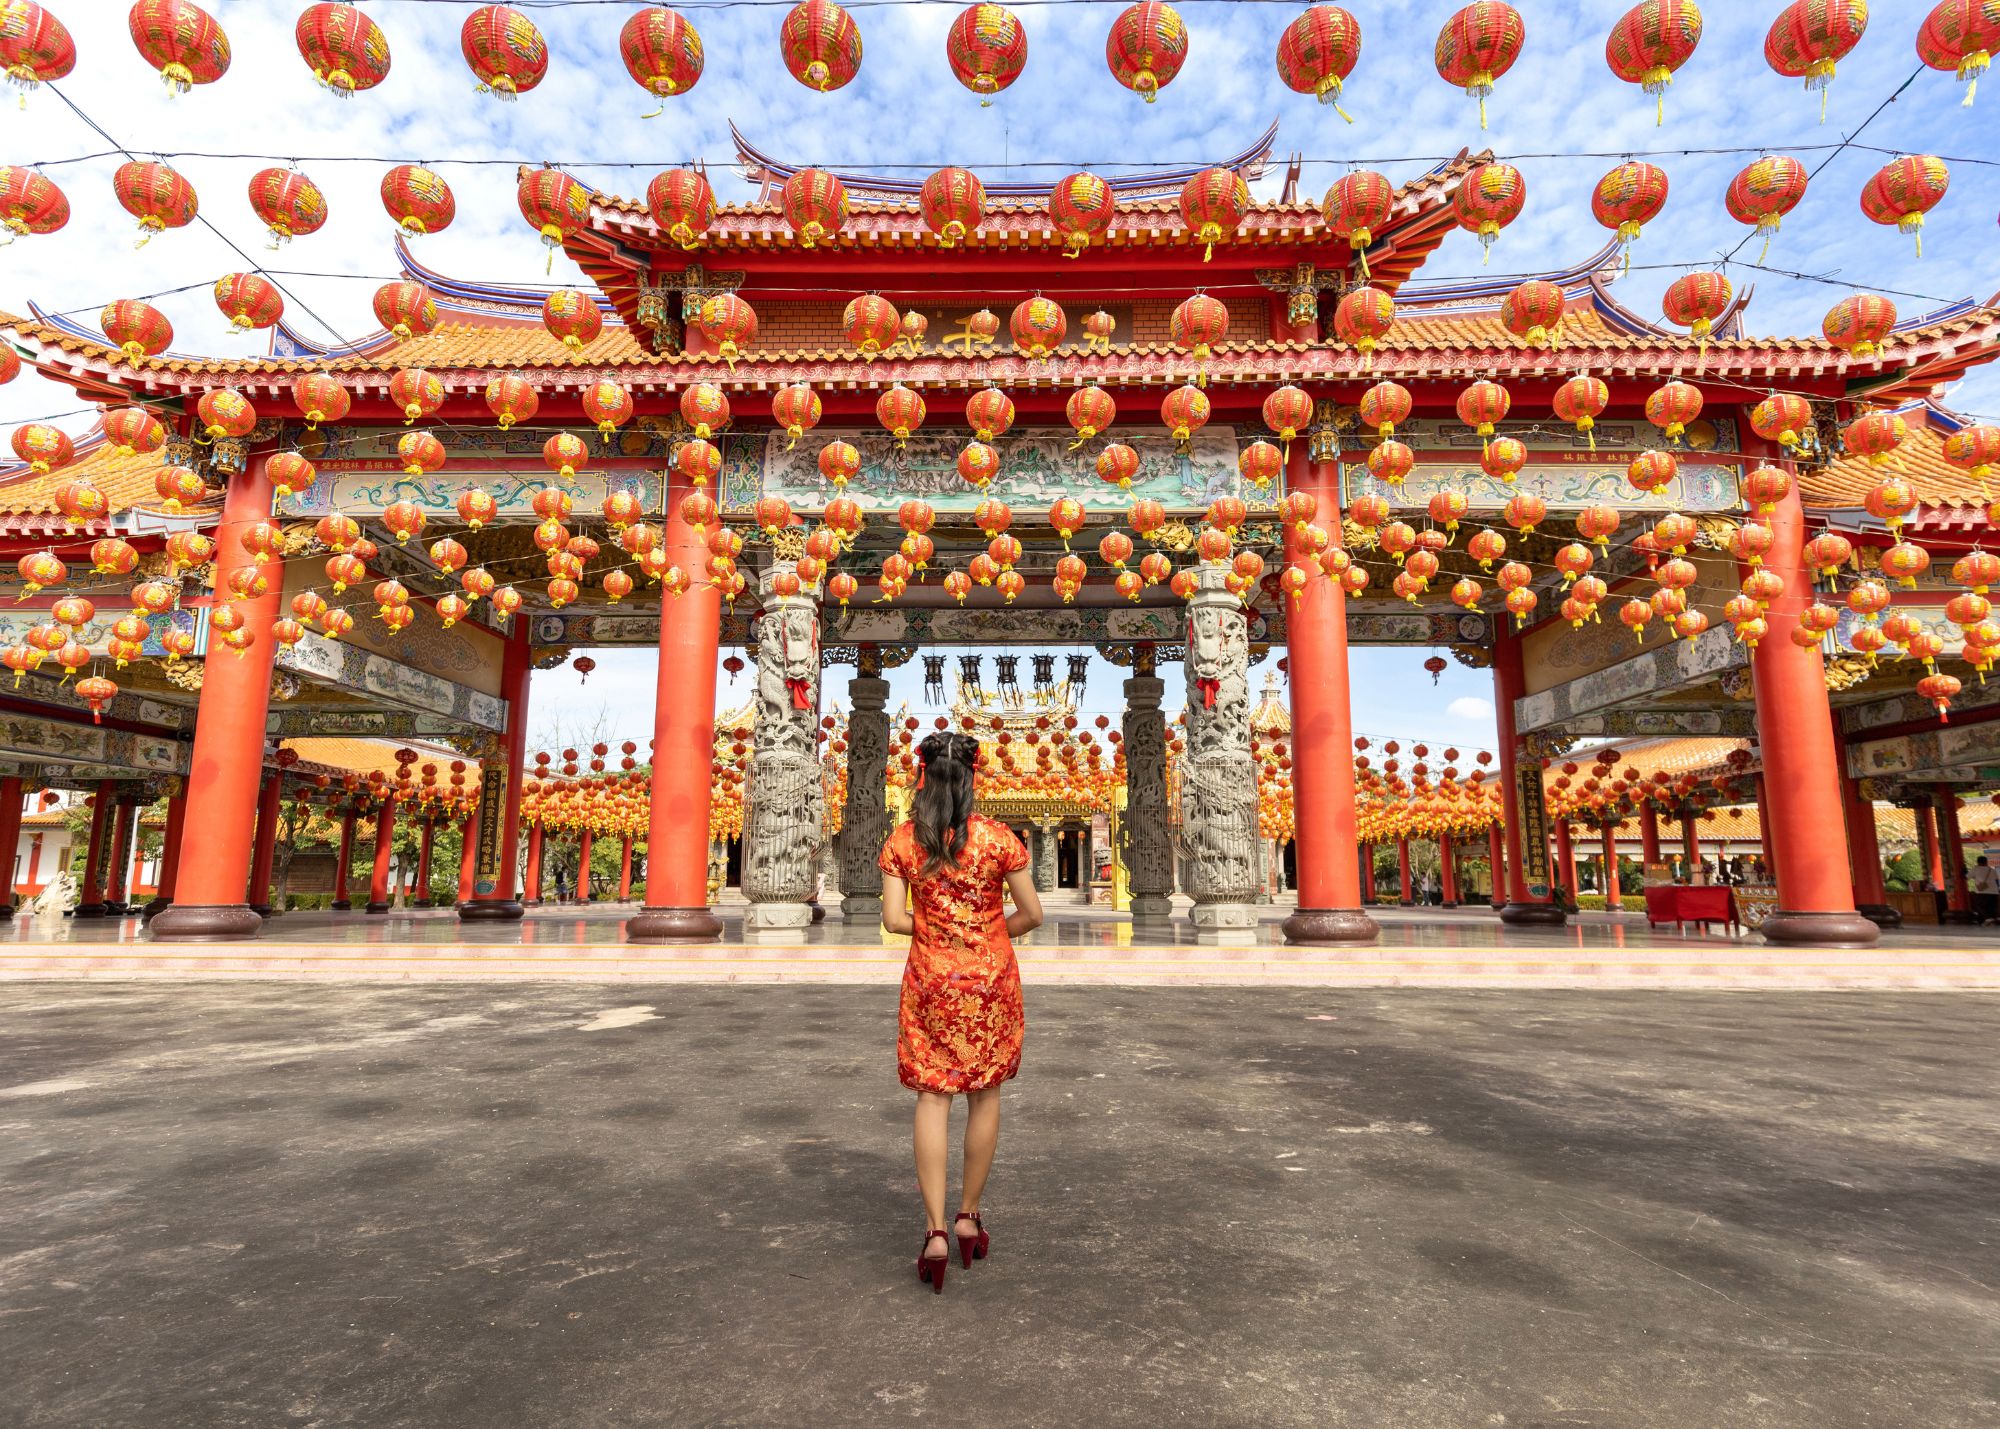 A woman dressed in a red and gold dress looking at Lunar New Year decor surrounding a temple.